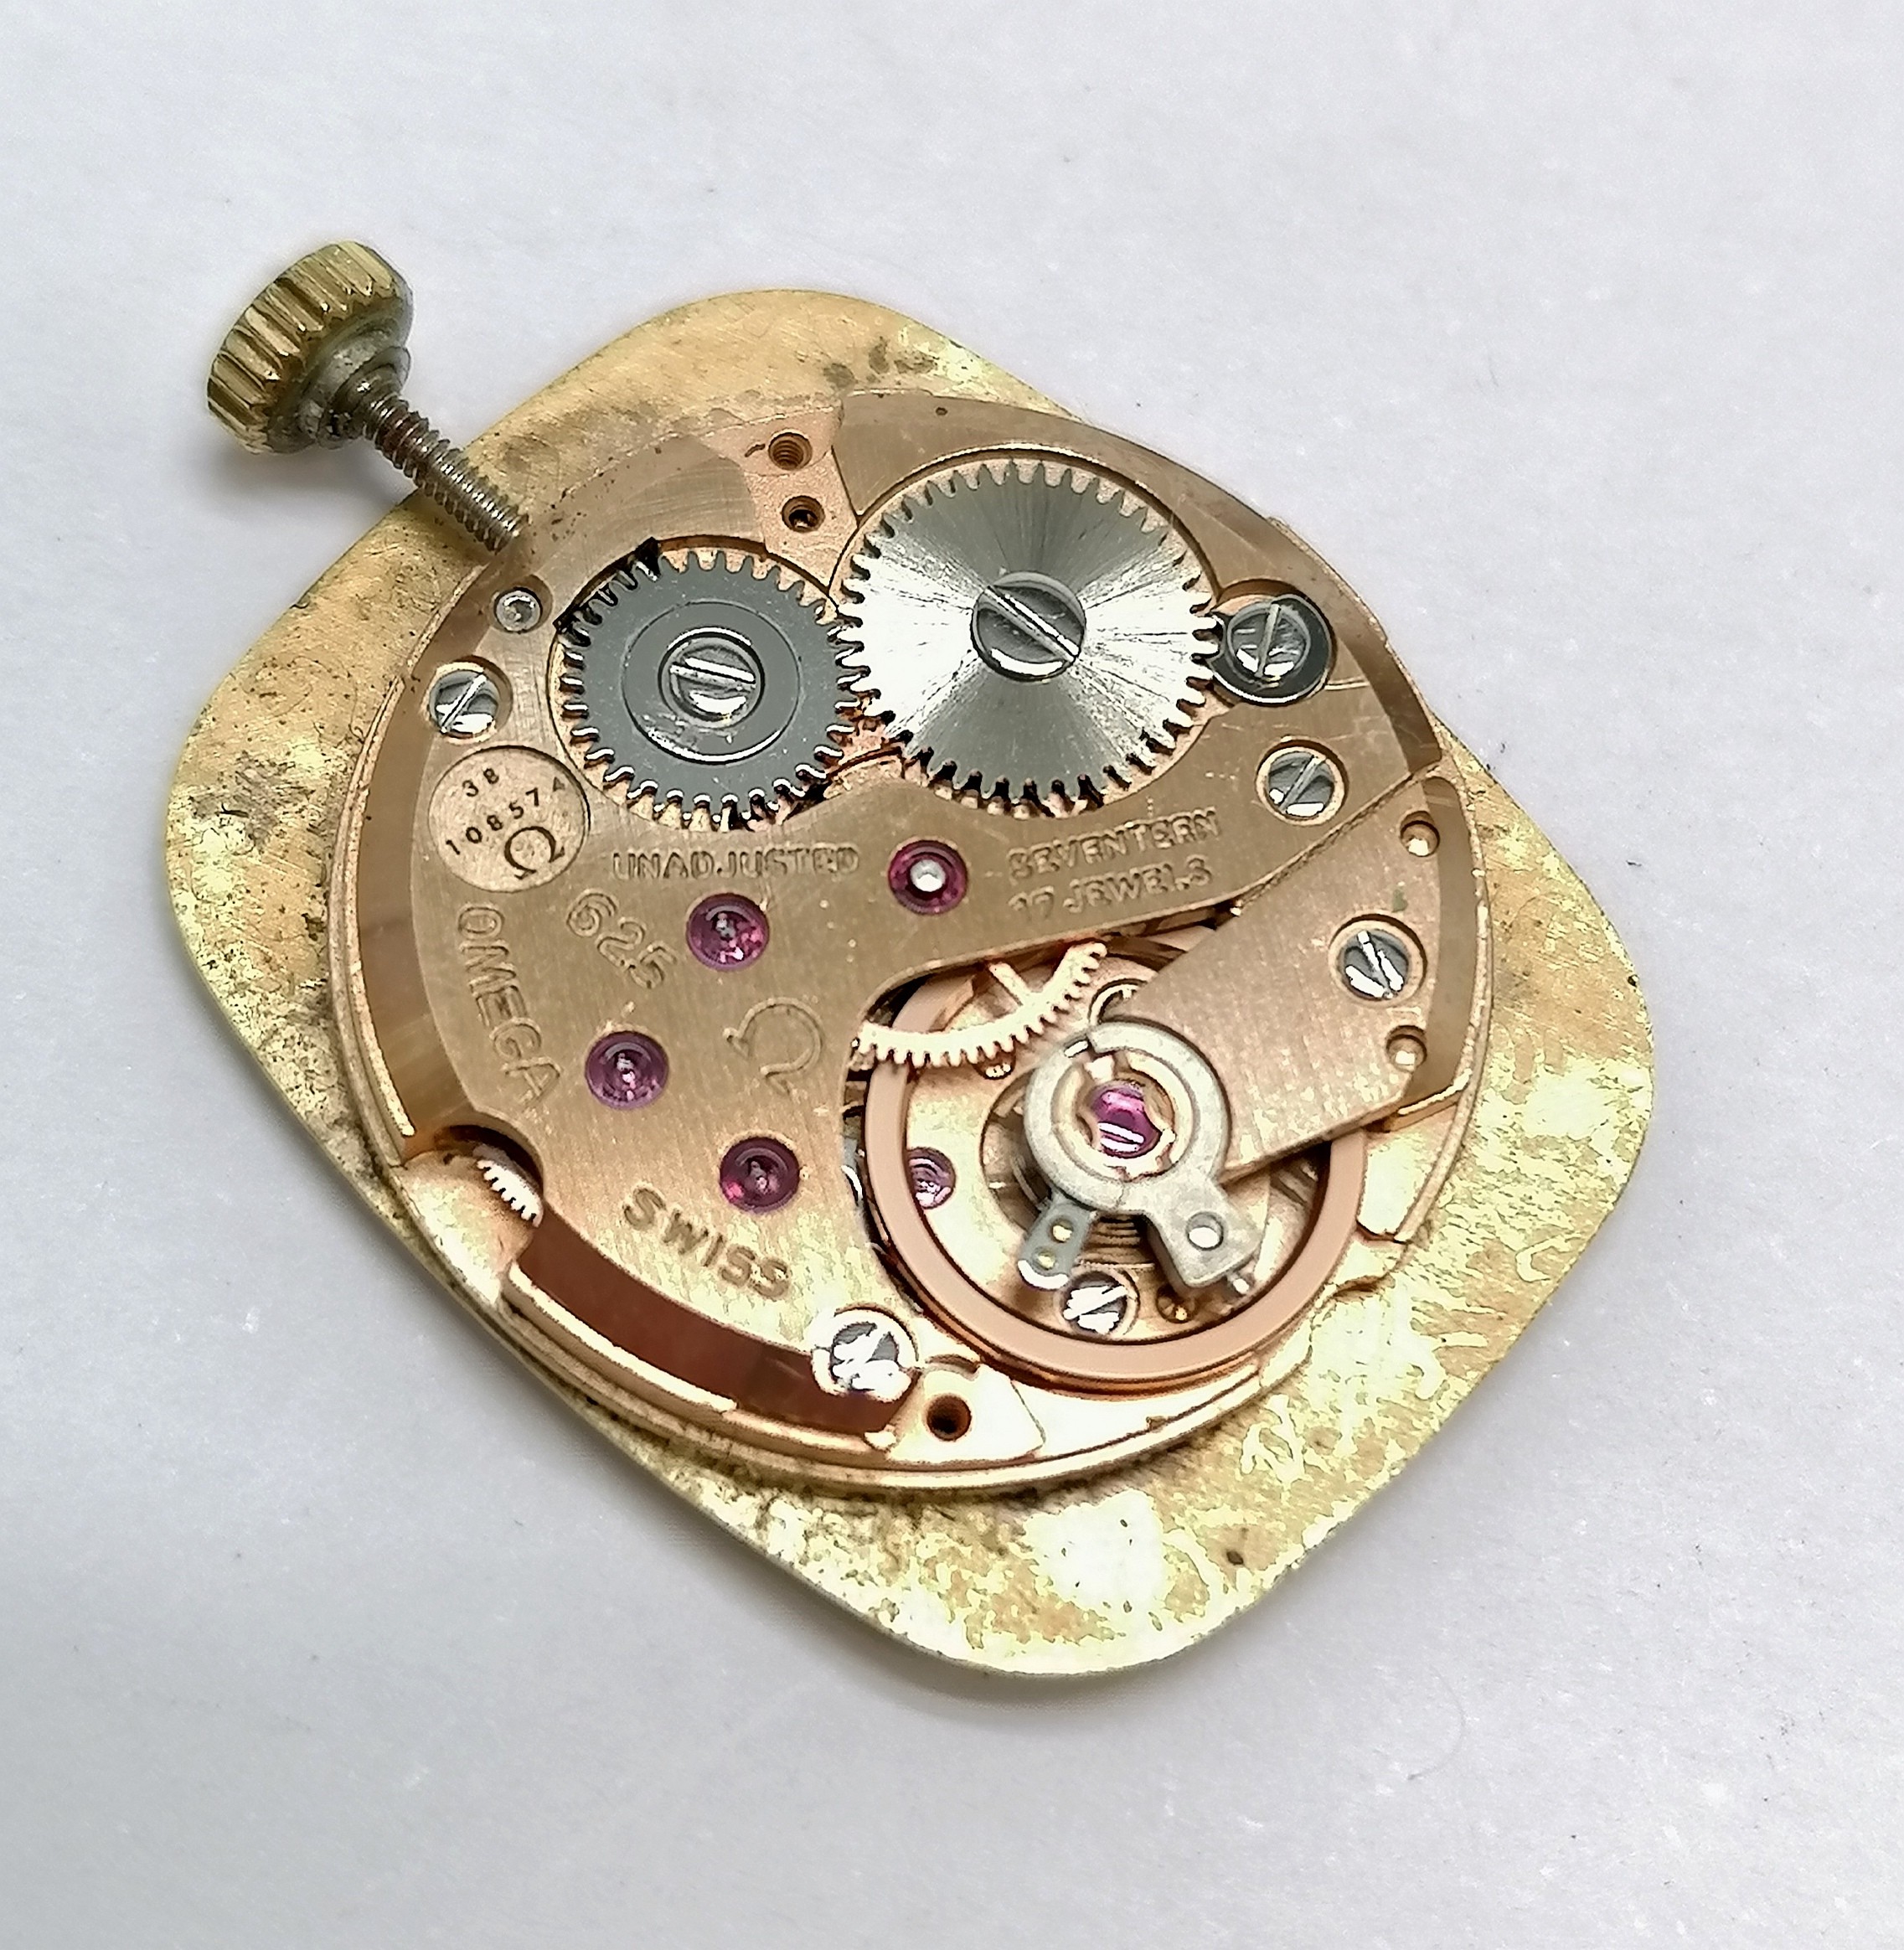 Omega mid-size manual wind wristwatch with 625 movement in a gold plated case on a stretchy - Image 2 of 3